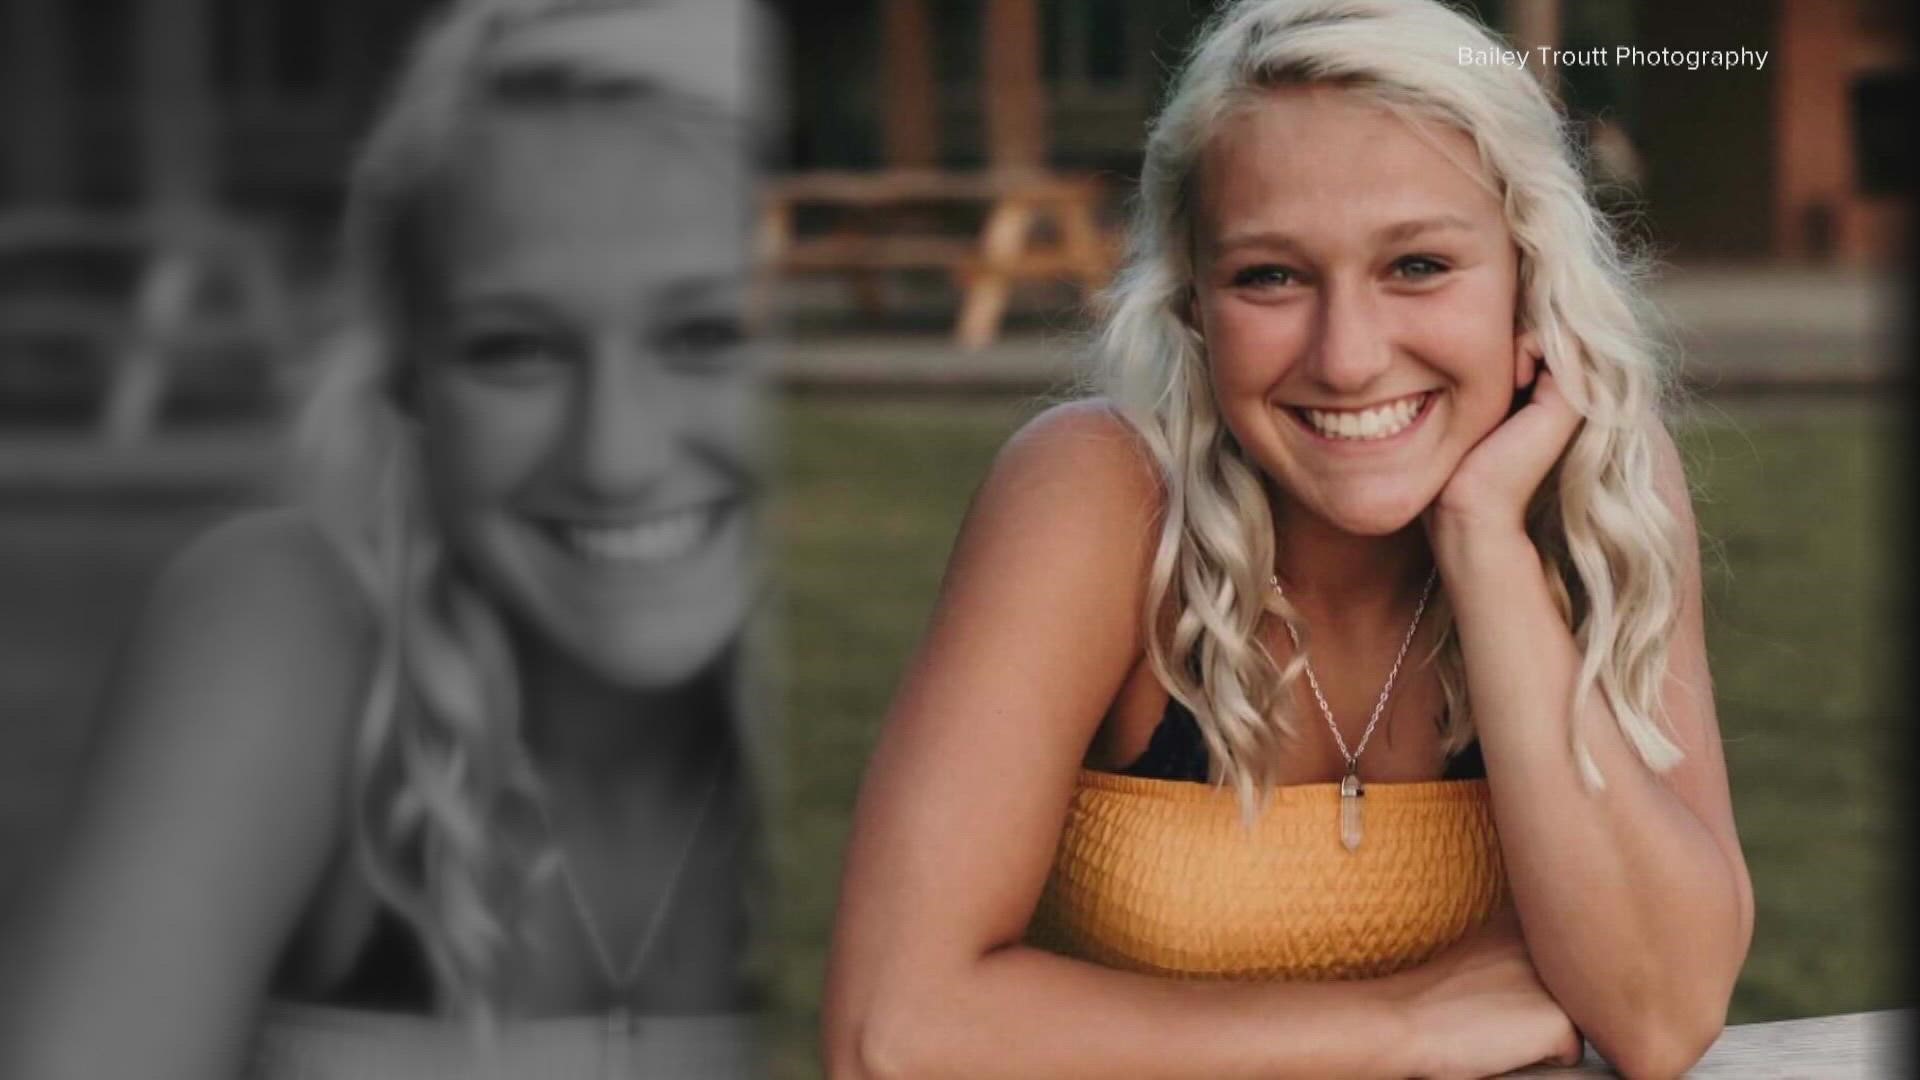 Madelynn Troutt was killed in a head-on car crash in 2021. In 2022, her family sued the group that bonded the suspect out of jail, prior to Troutt's death.